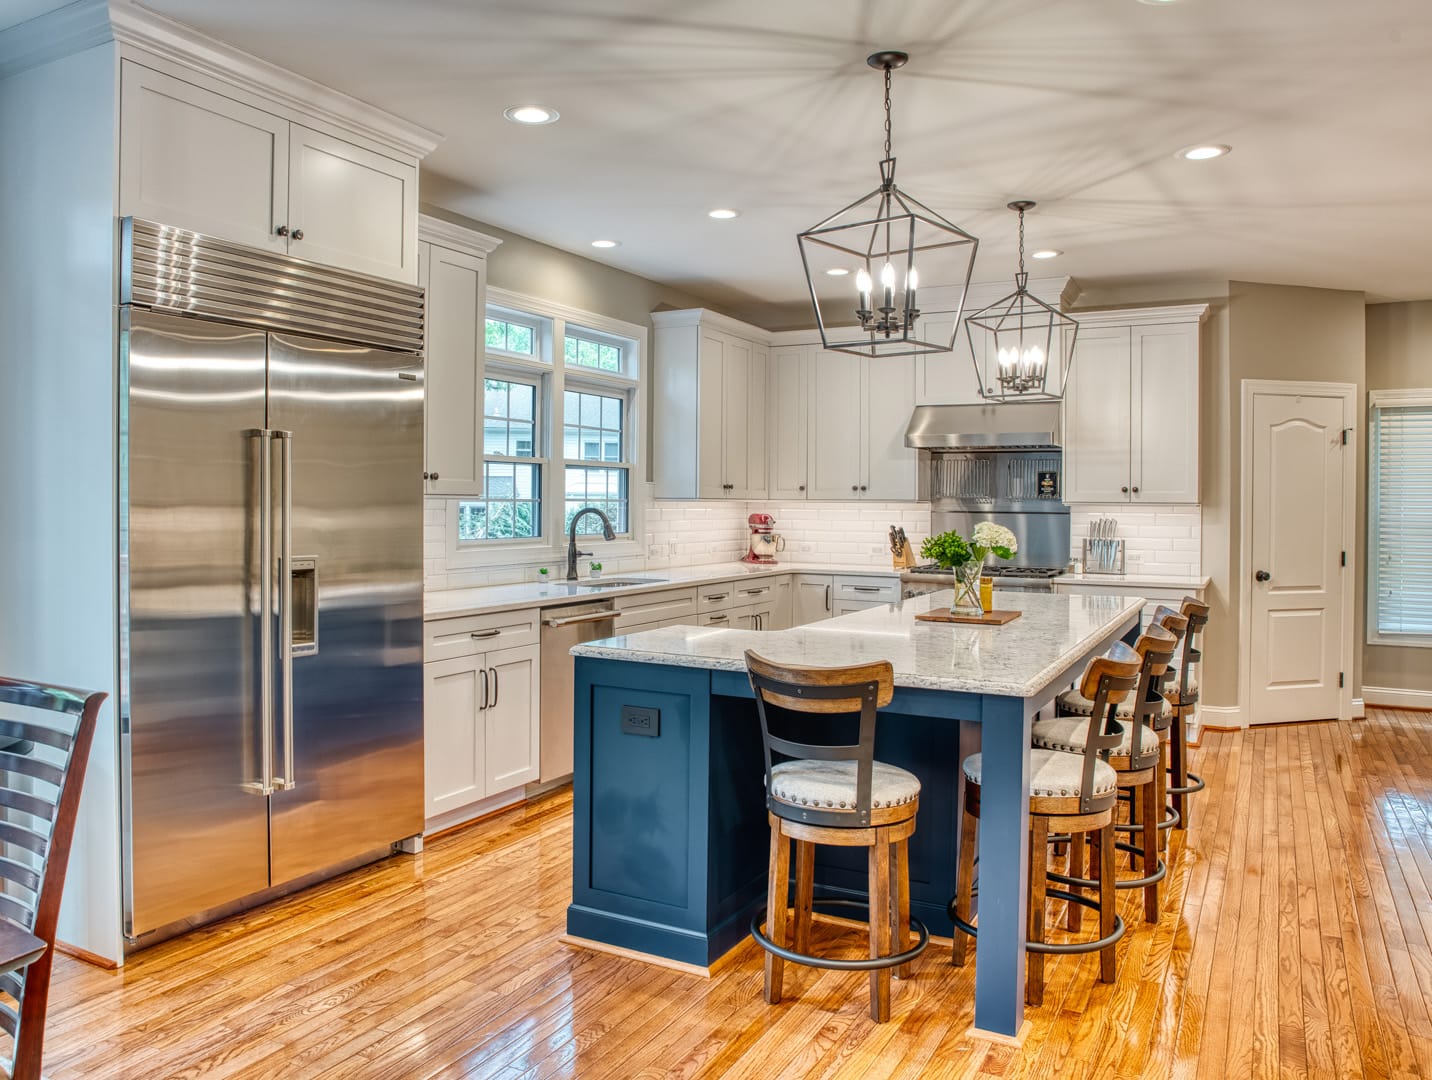 Custom kitchen remodel in Vienna VA with Crystal cabinetry and custom blue island